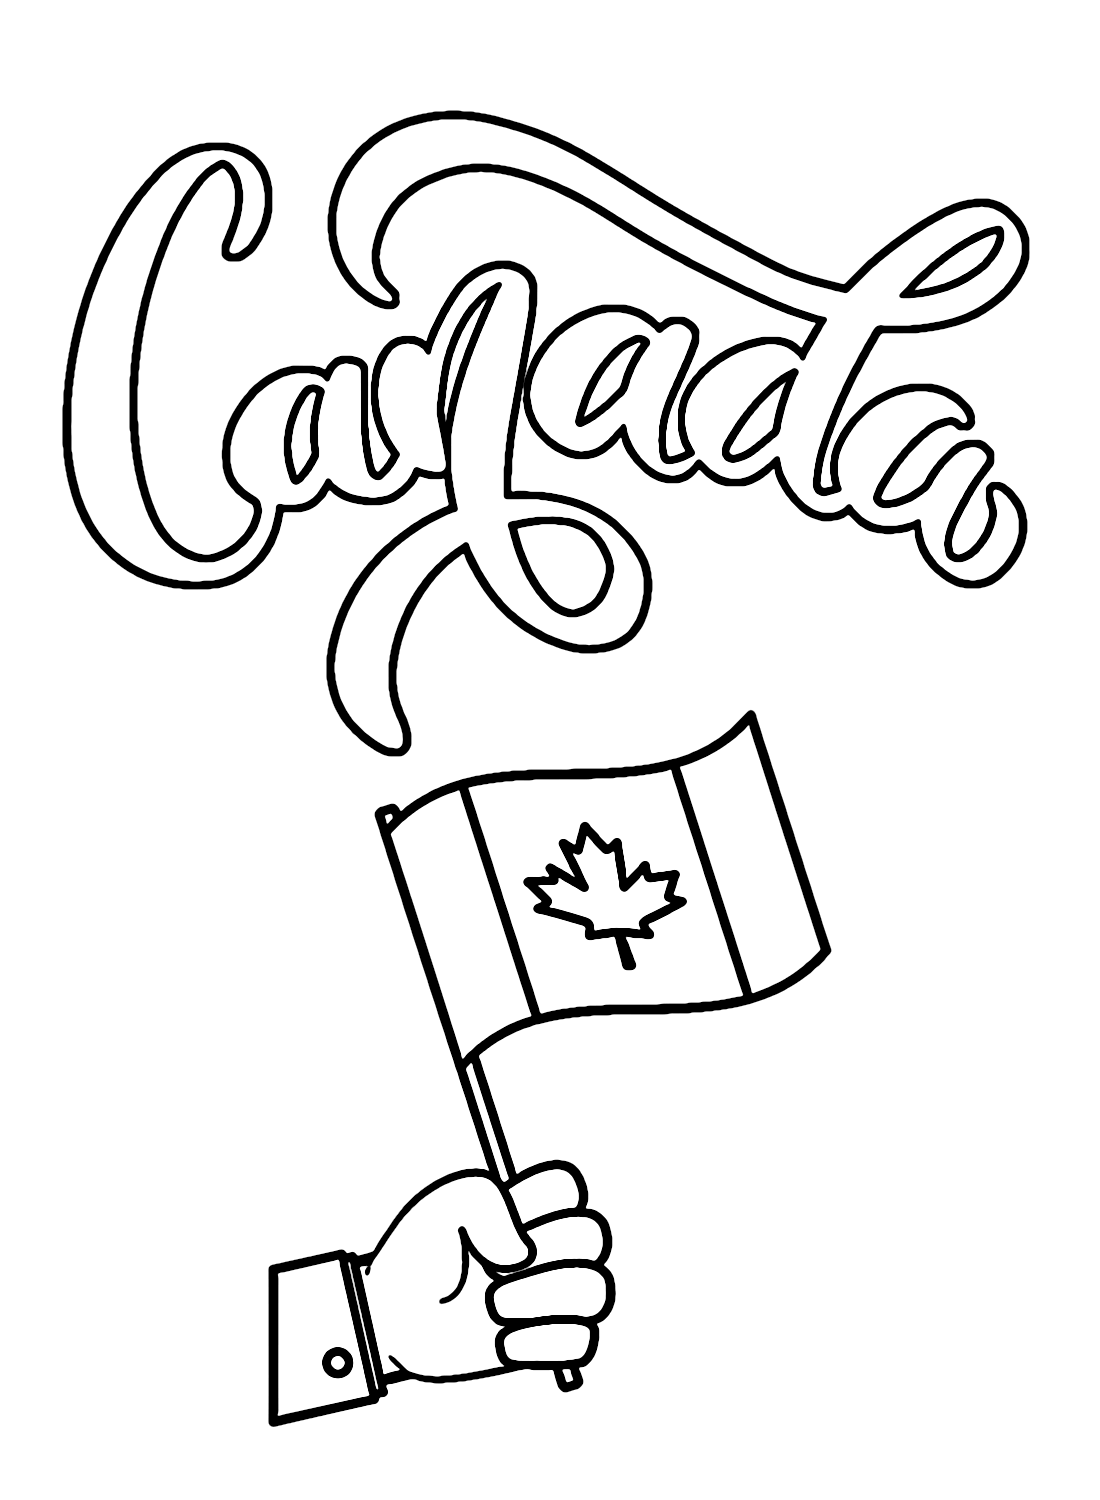 Canada coloring pages printable for free download